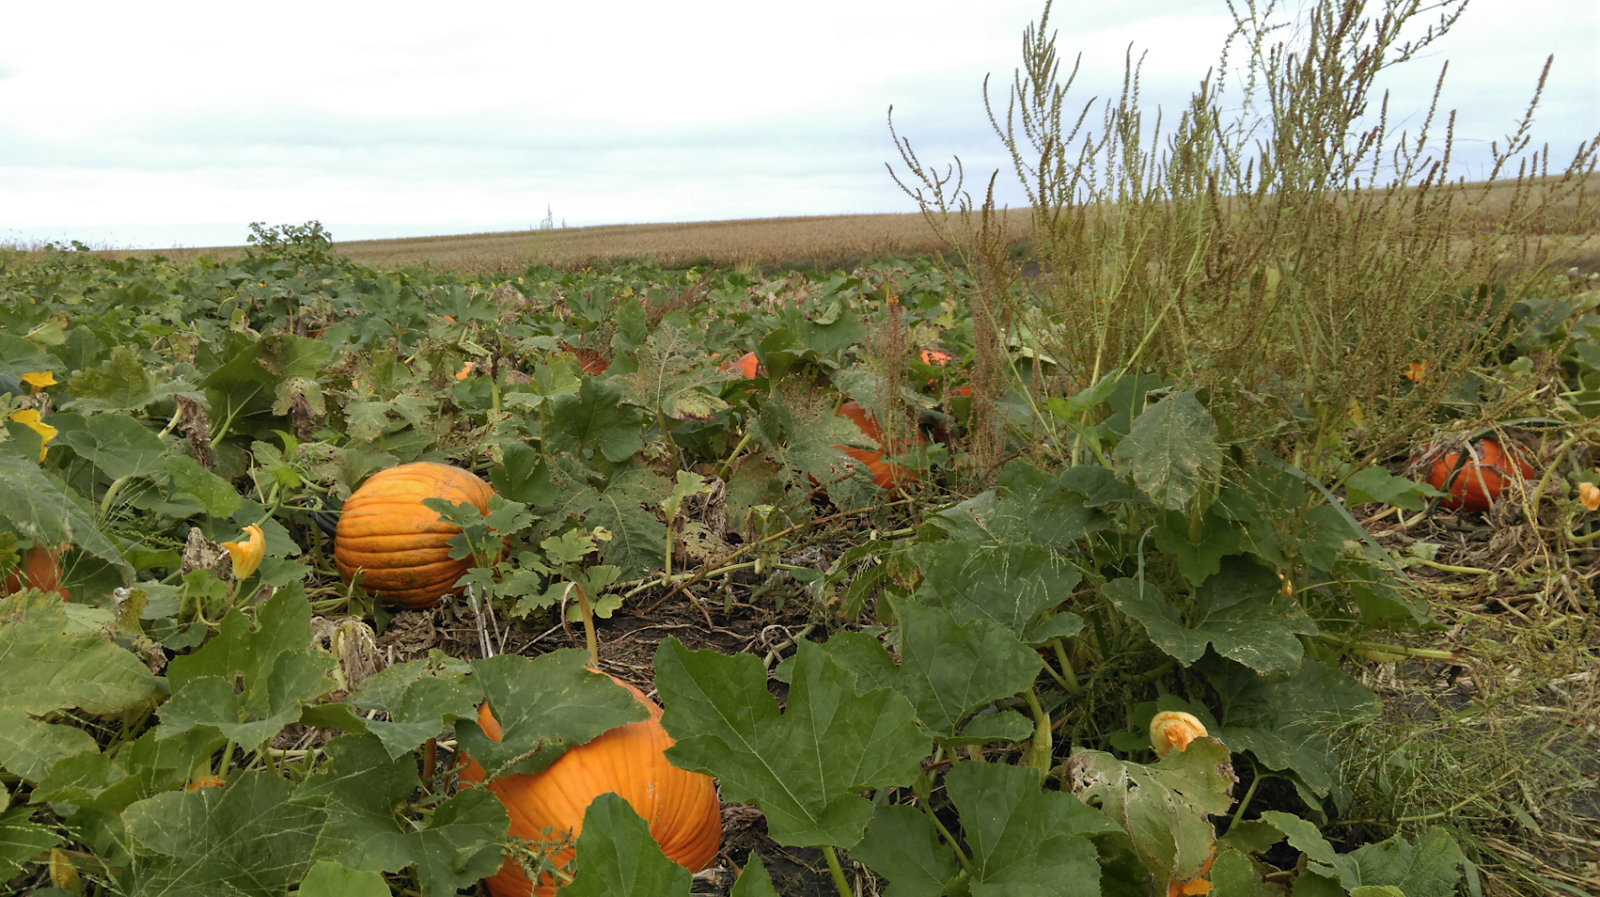 Weed Control in Pumpkins and Winter Squash